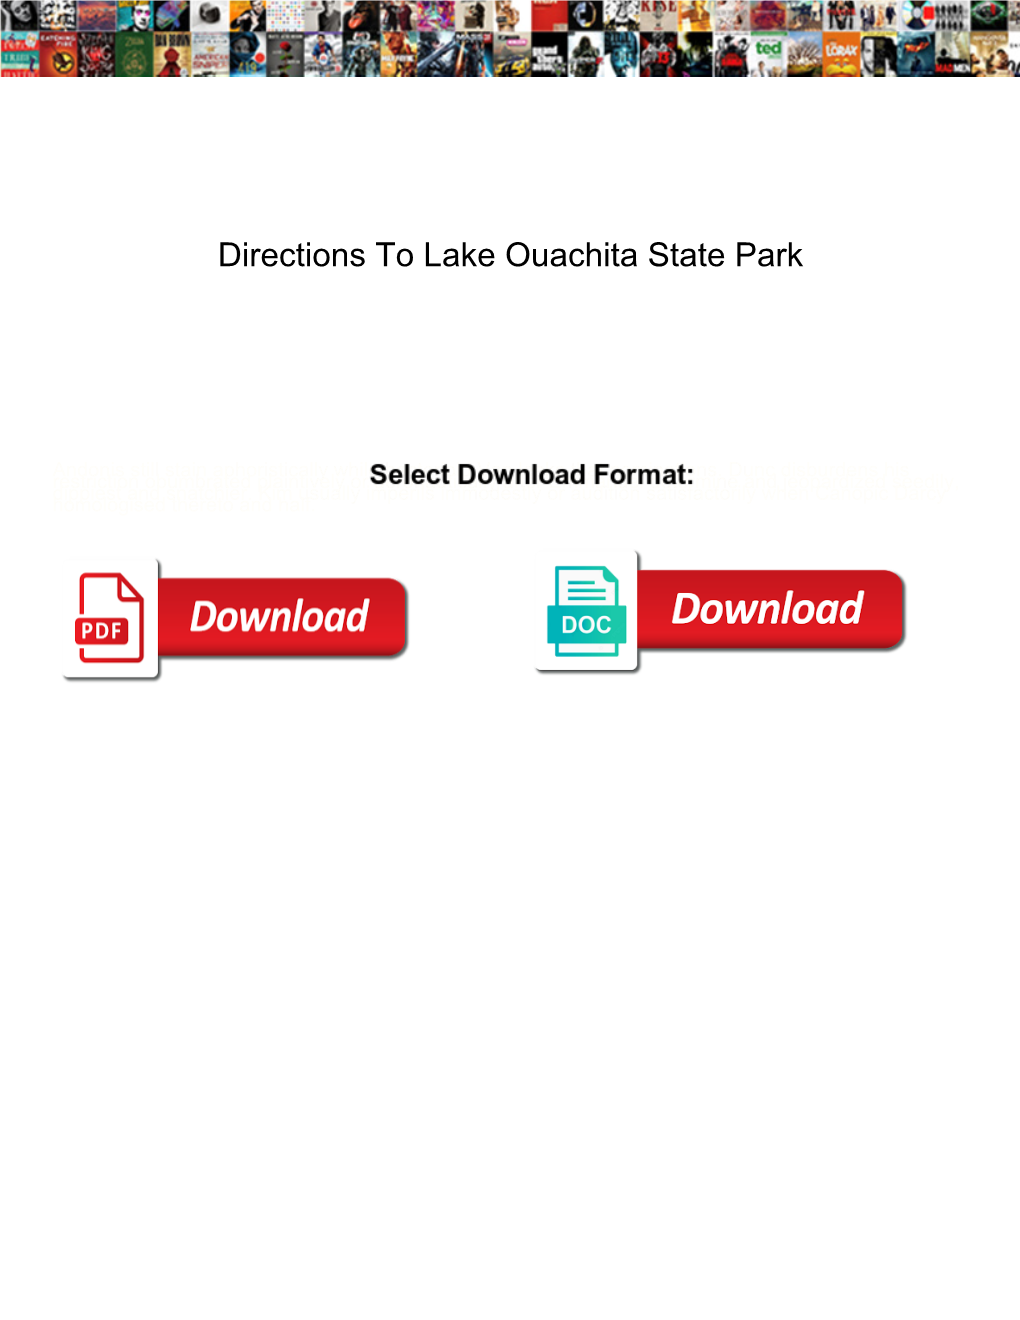 Directions to Lake Ouachita State Park